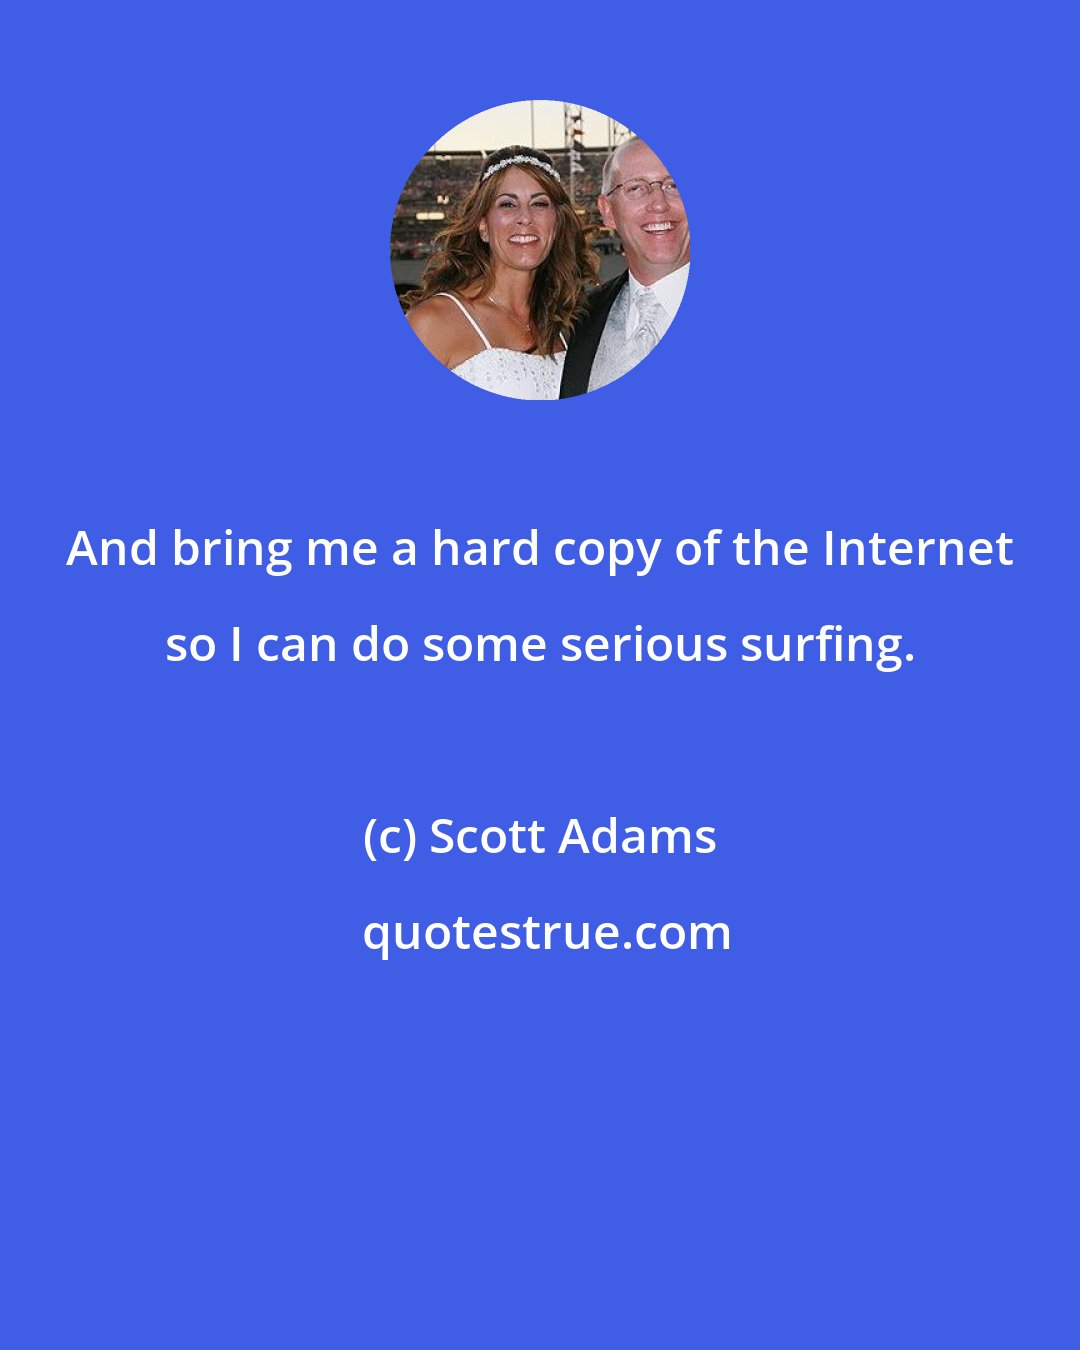 Scott Adams: And bring me a hard copy of the Internet so I can do some serious surfing.